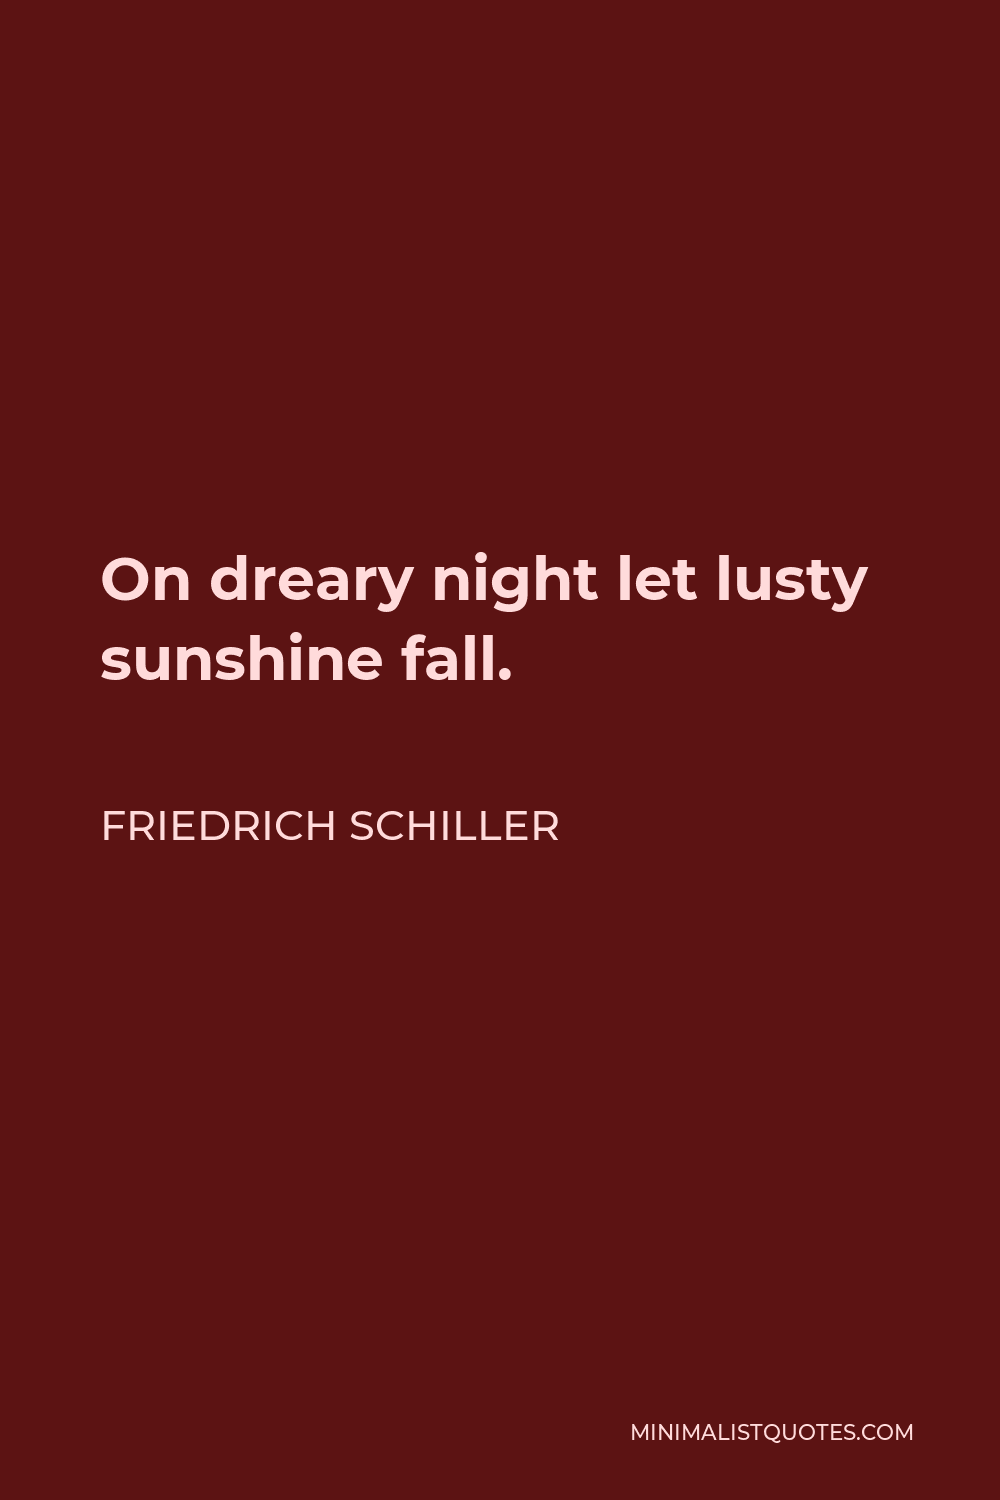 Friedrich Schiller Quote - On dreary night let lusty sunshine fall.